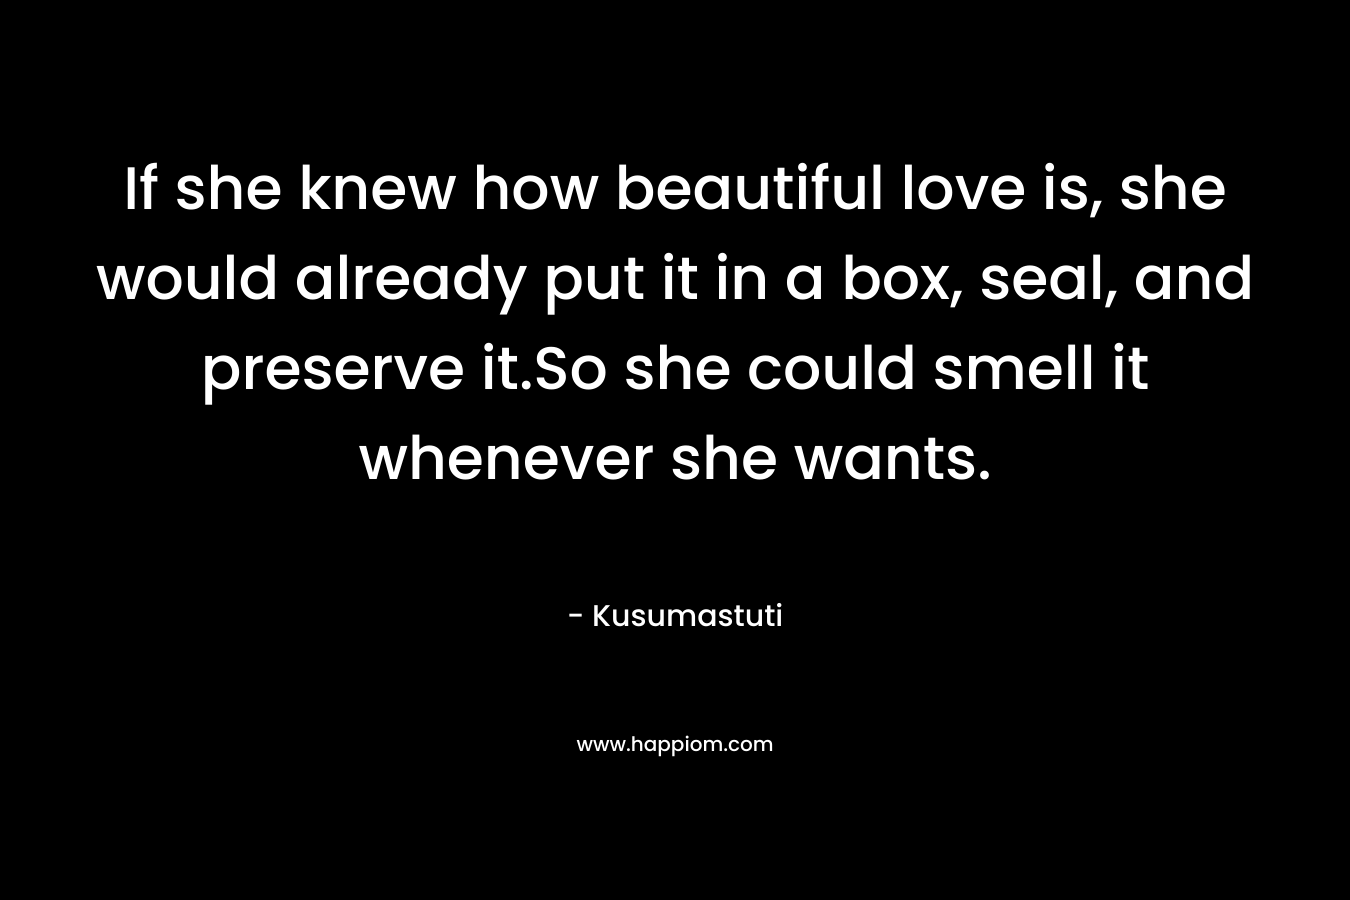 If she knew how beautiful love is, she would already put it in a box, seal, and preserve it.So she could smell it whenever she wants. – Kusumastuti